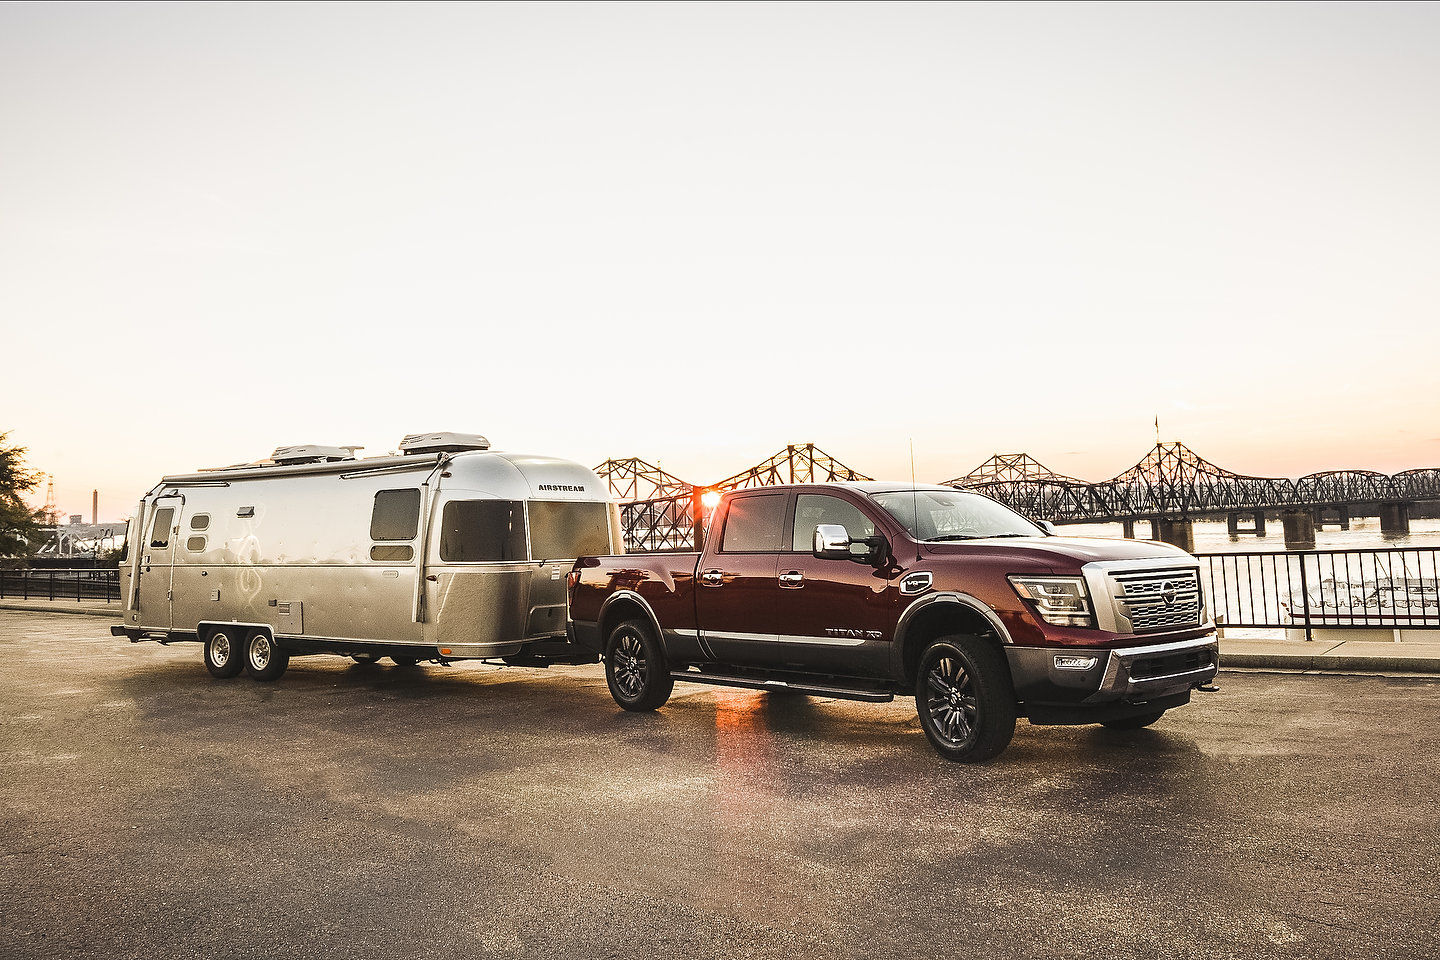 A few tips for towing with your Nissan vehicle this summer